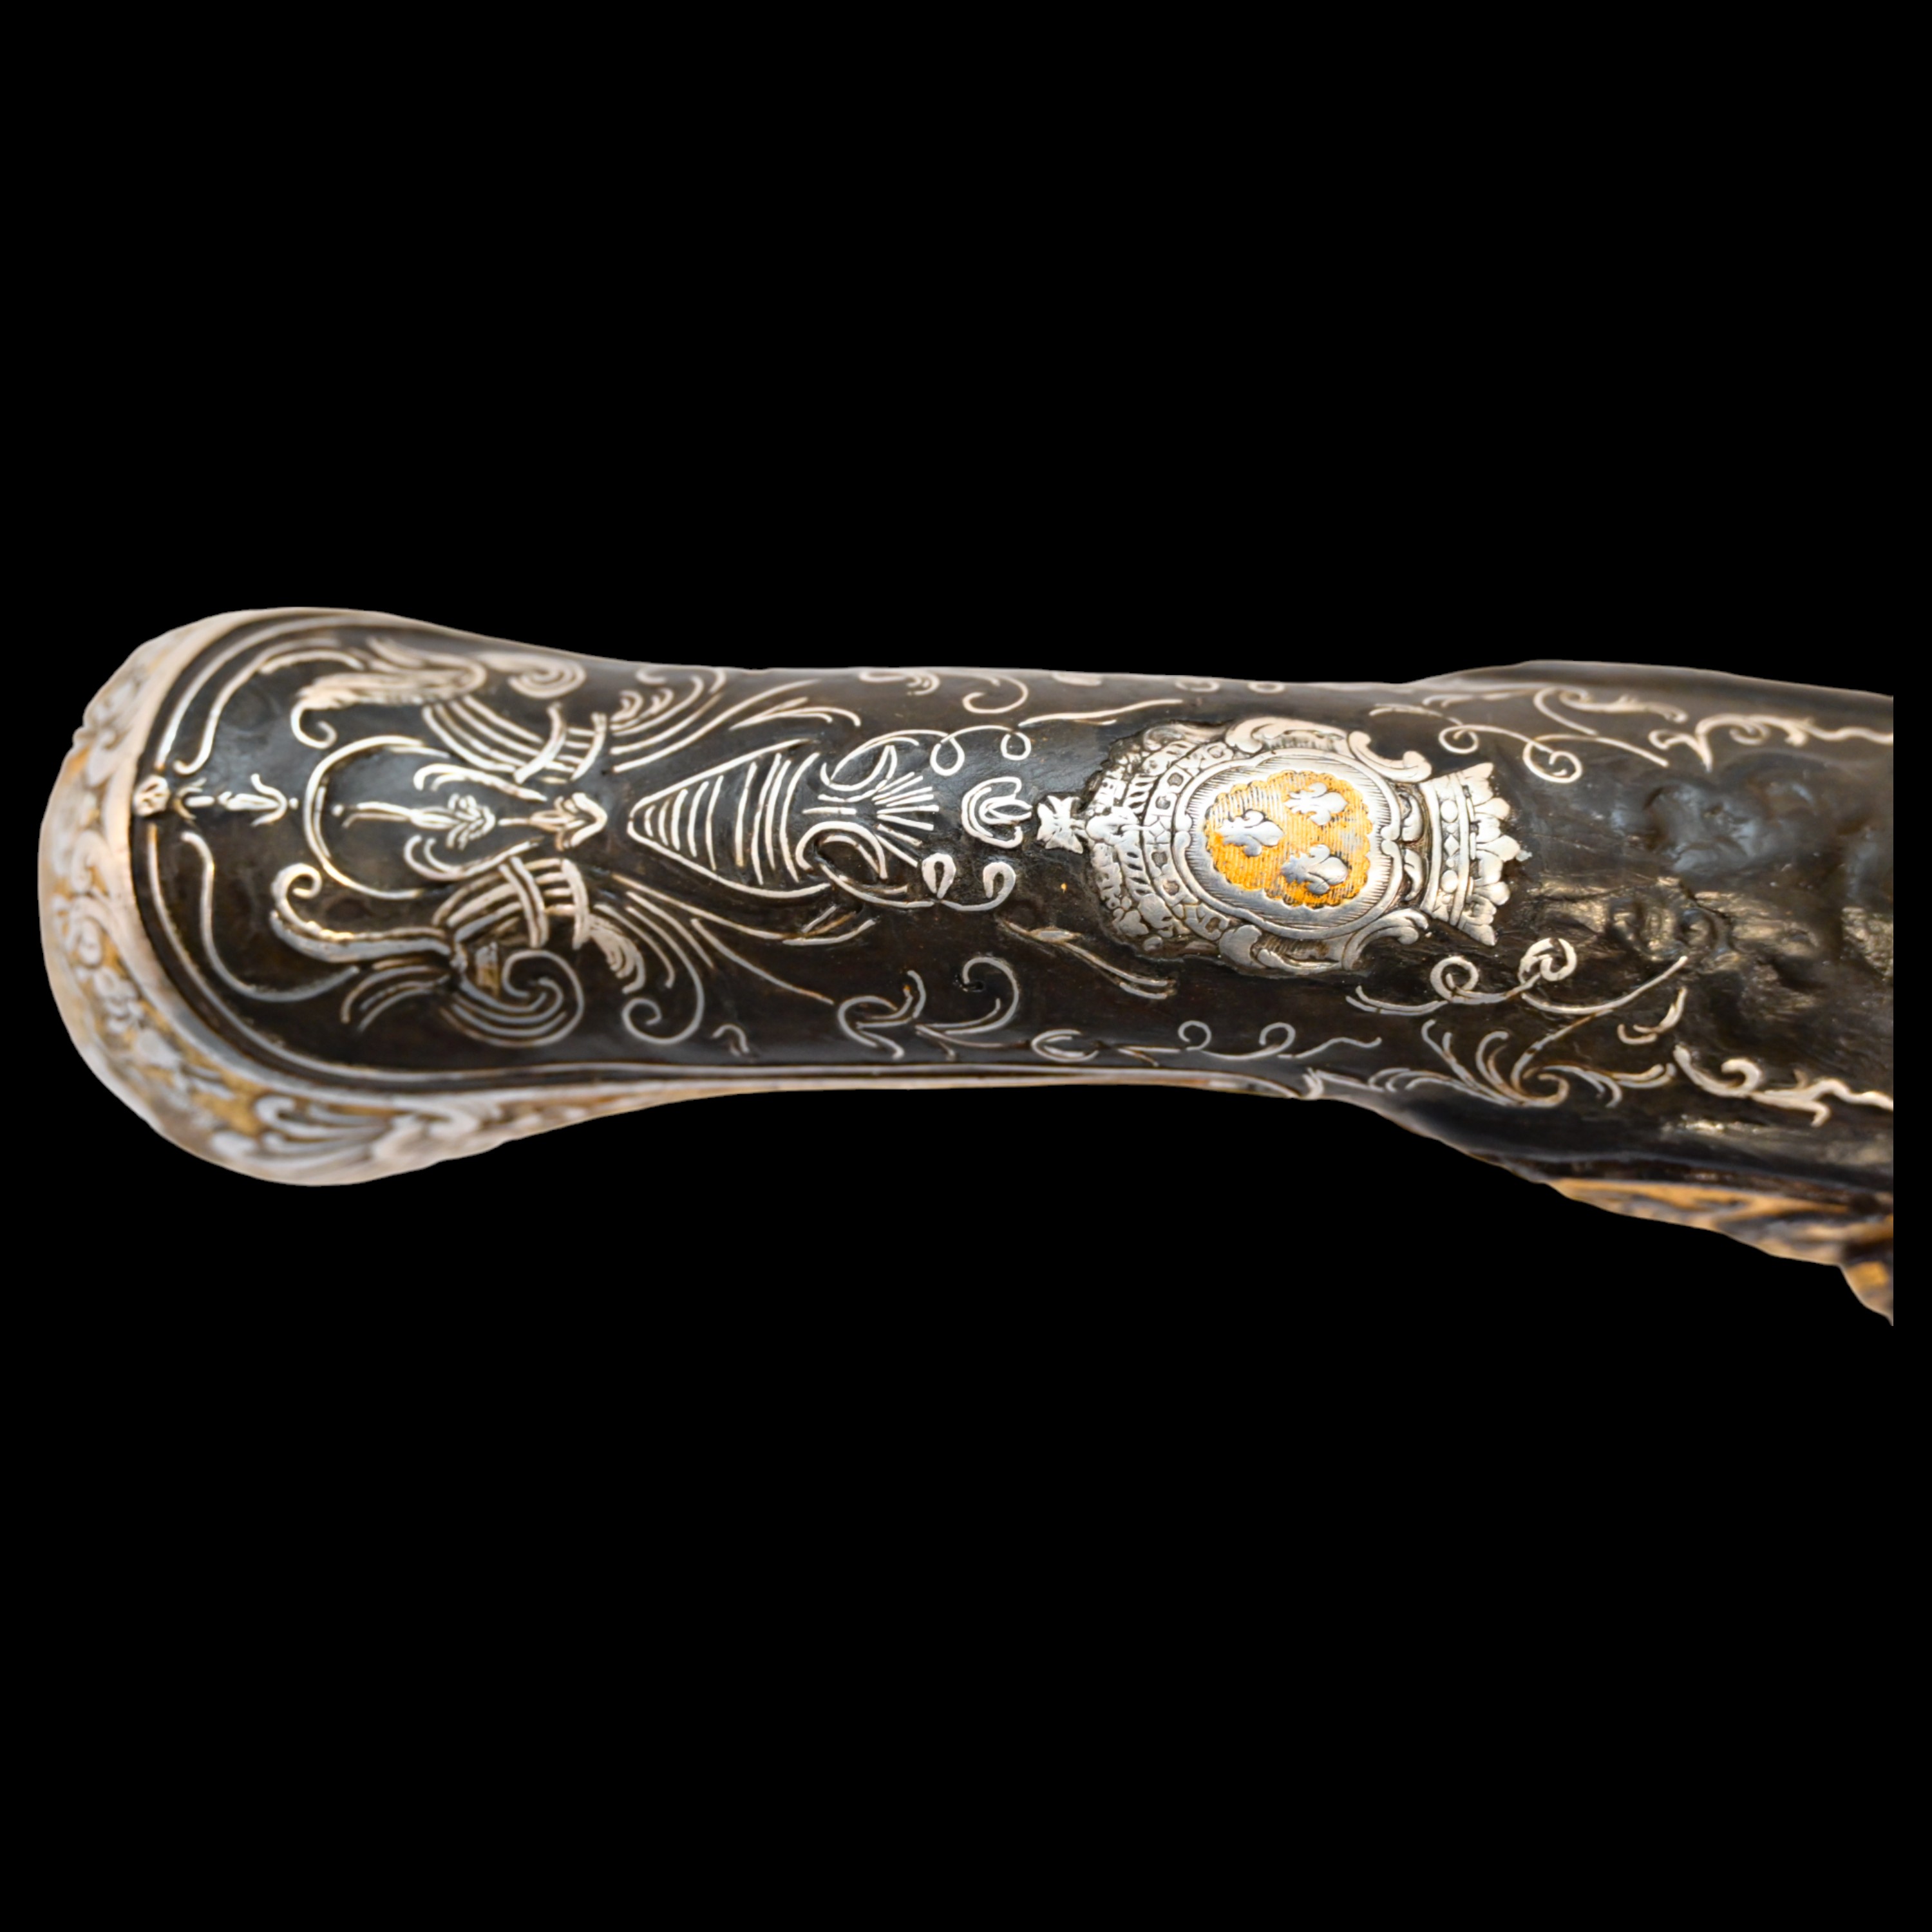 A unique flintlock pistol of Charles Philippe - future King Charles X, France, 1780s. - Image 5 of 11